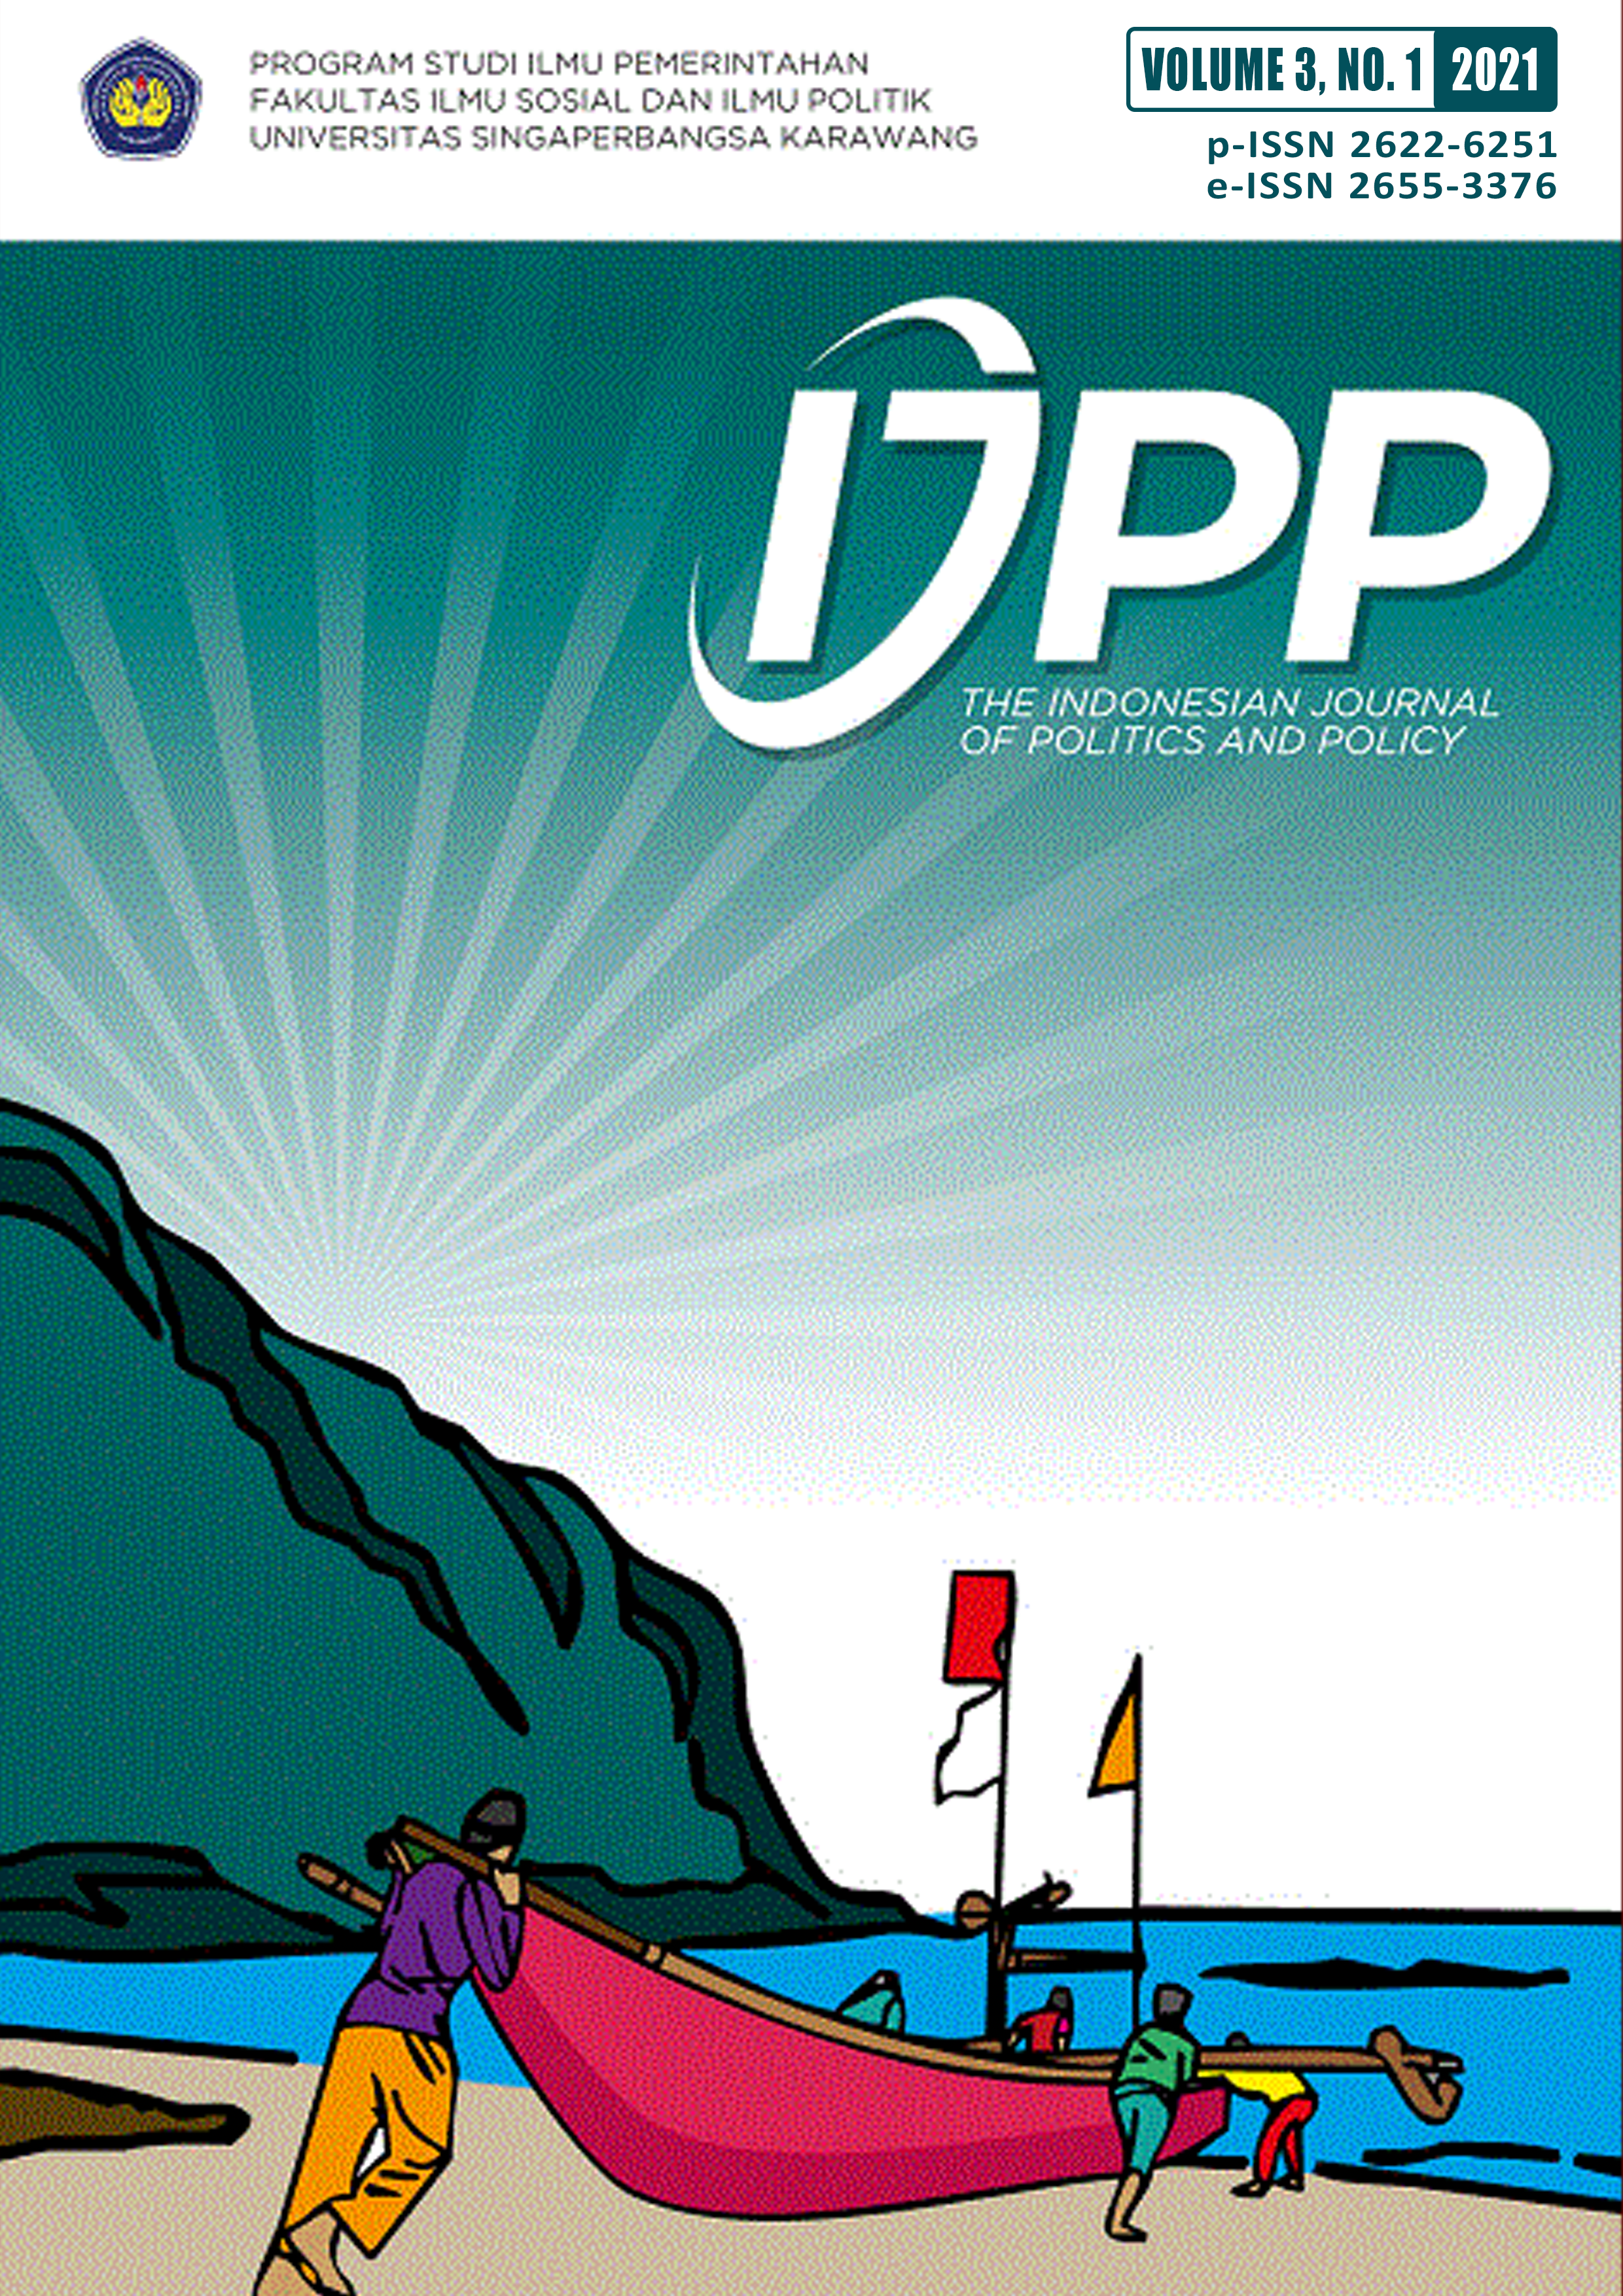 					View Vol. 3 No. 1 (2021): THE INDONESIAN JOURNAL OF POLITICS AND POLICY
				